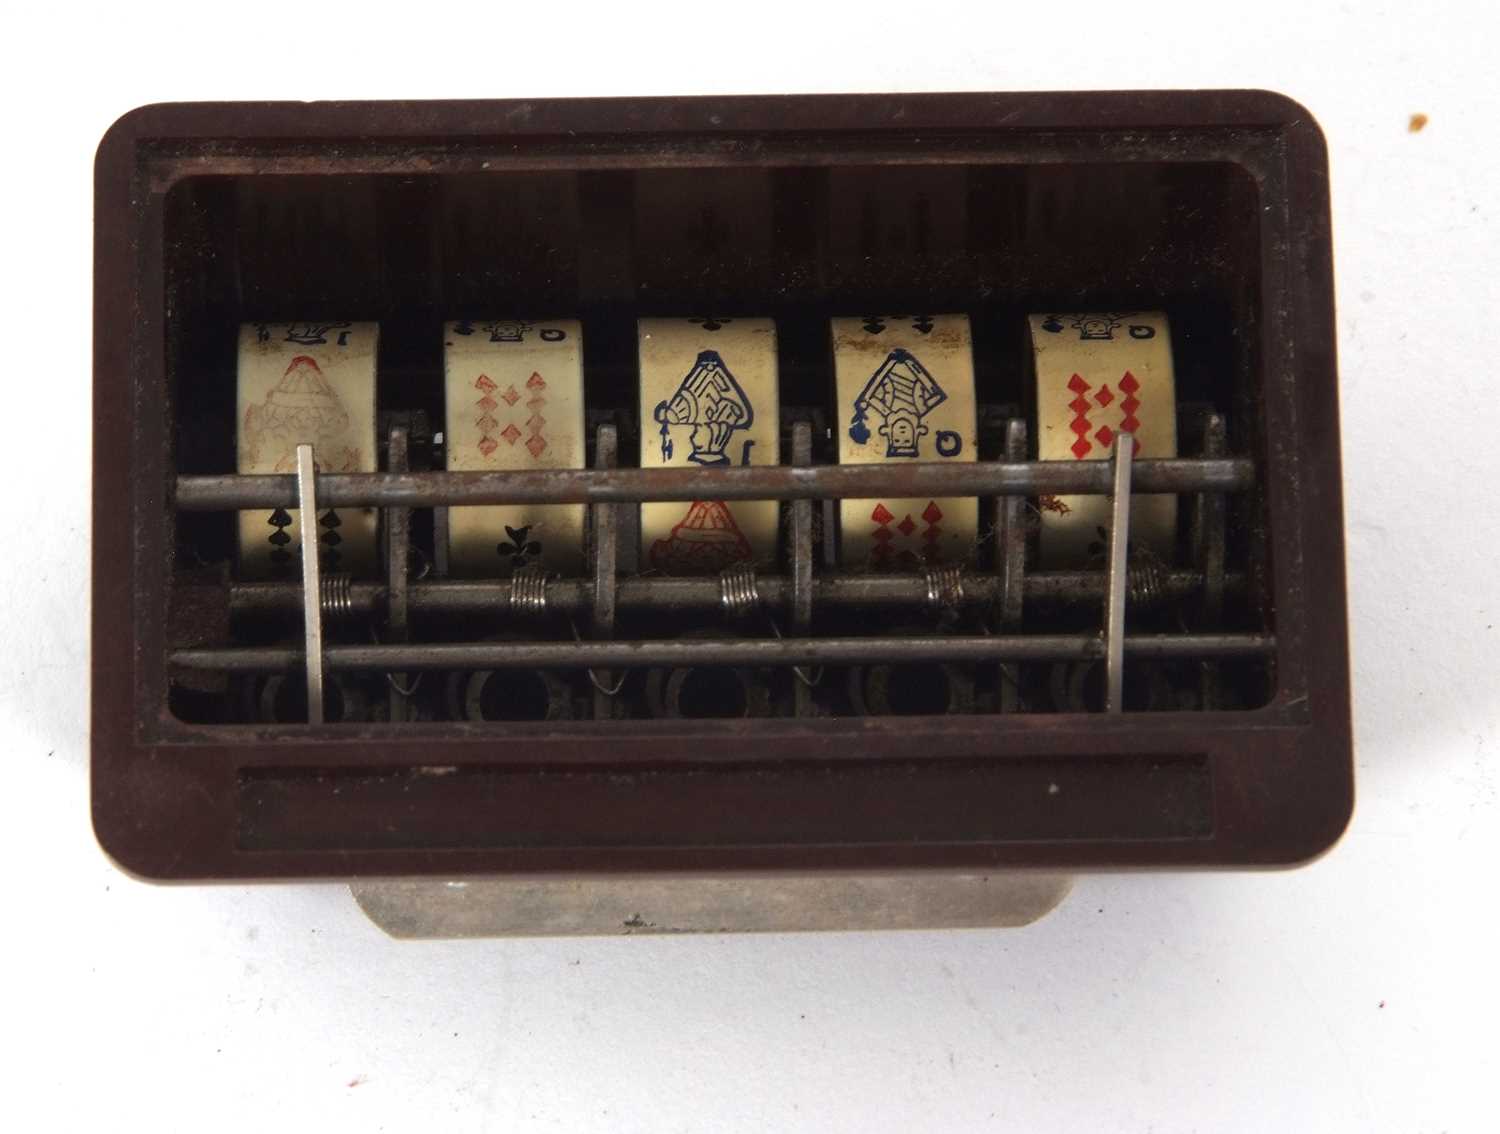 A vintage poker dice game, a push button rotating system featuring five hand painted poker die - Image 5 of 5